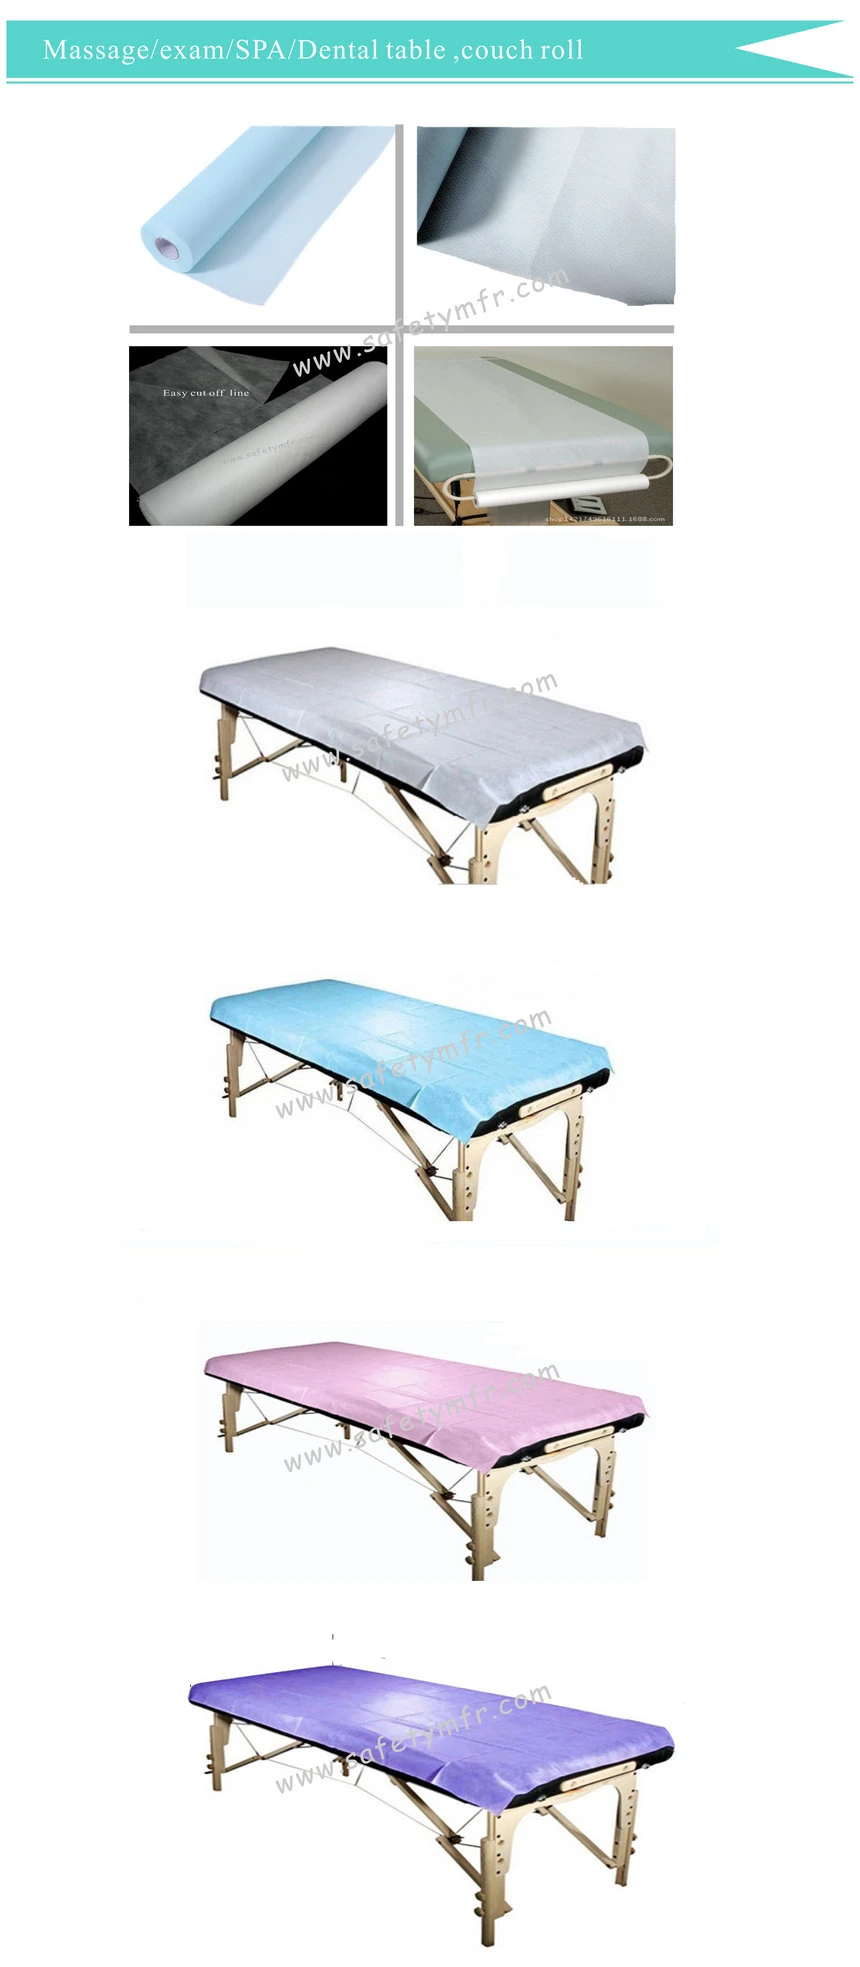 SPA/Salon/Hospital/medial/dental/clinic/Exam Table Perforated Paper Bedsheet Roll, Nonwoven Disposable bedsheet Roll